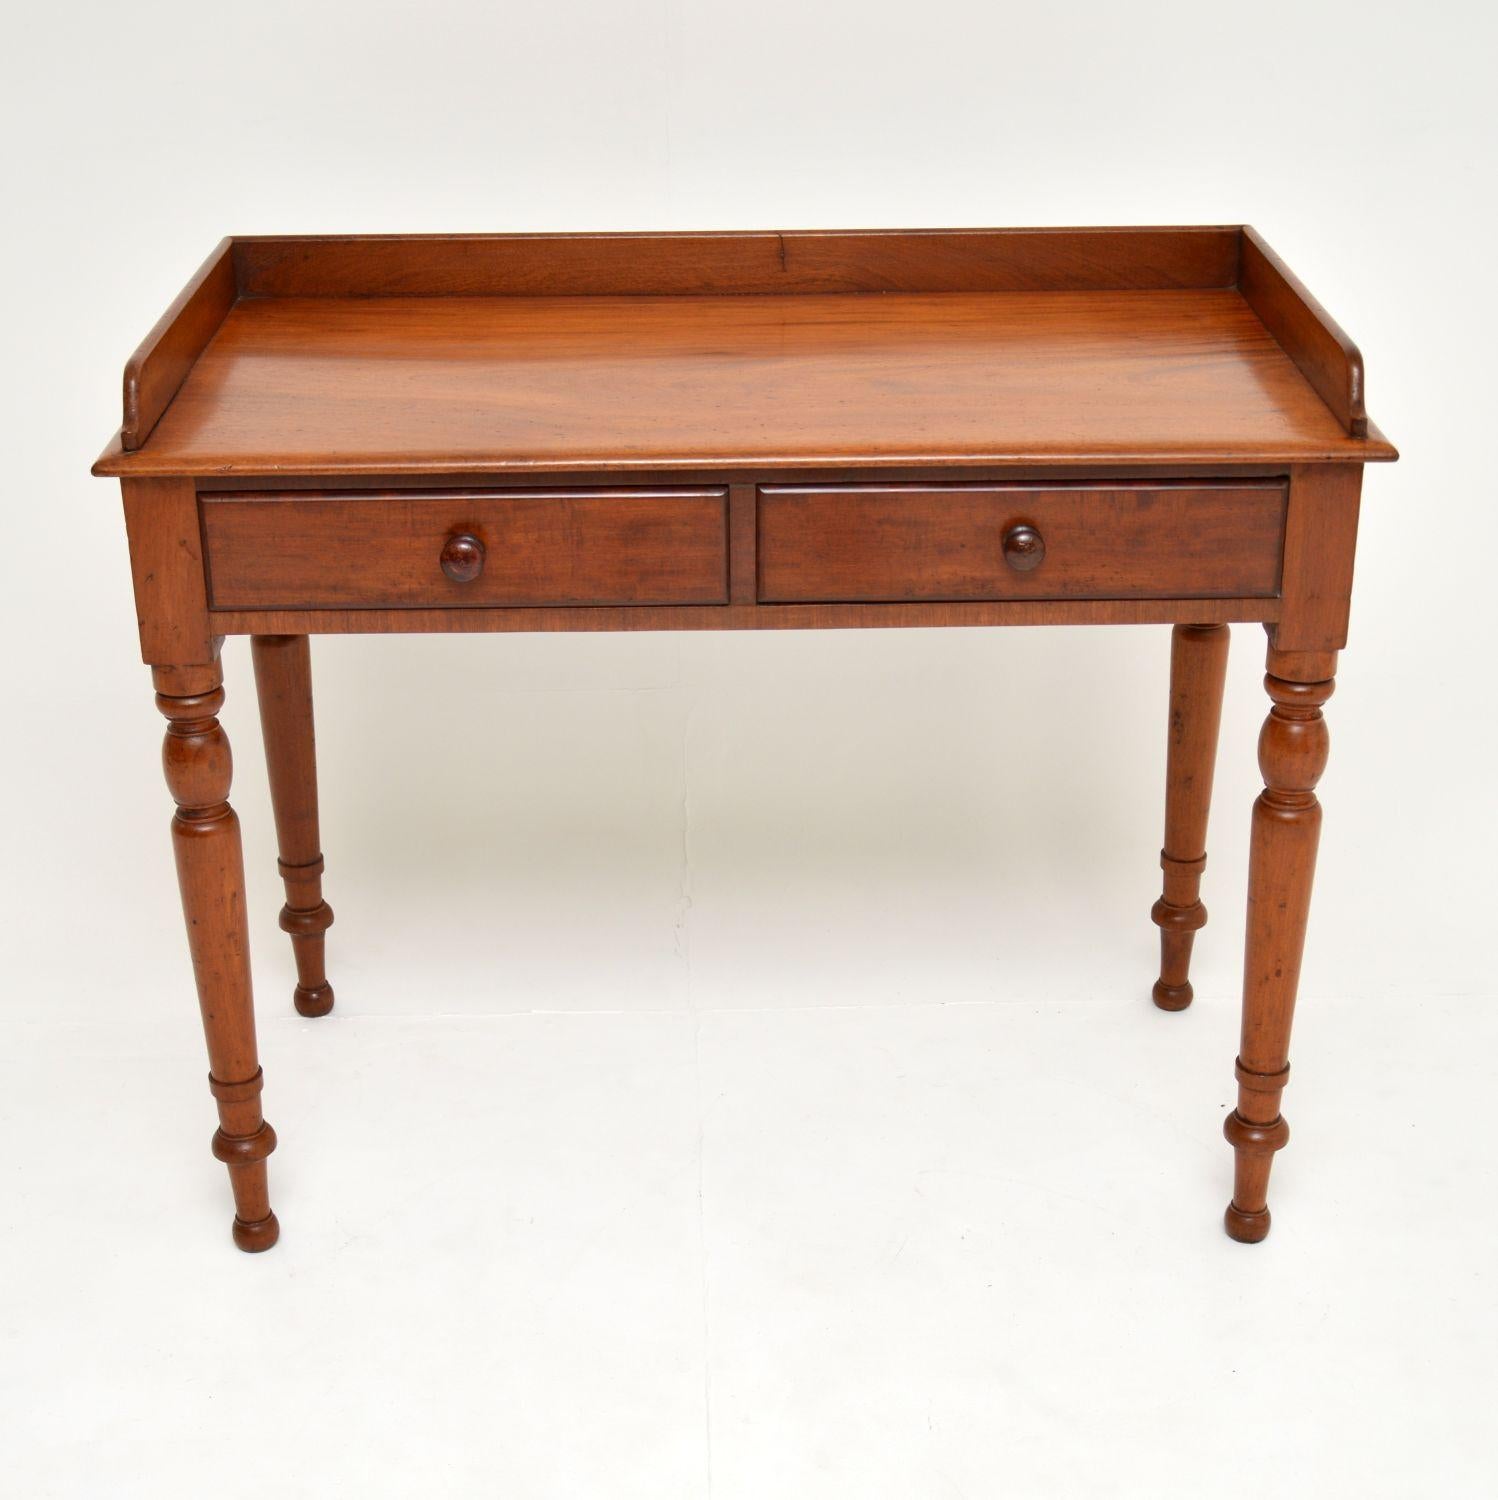 A lovely antique Victorian writing table in solid mahogany, this dates from circa 1860-1880 period.

It is of great quality and nice proportions. There is a gallery on the back and sides, solid mahogany writing surface and beautifully turned legs